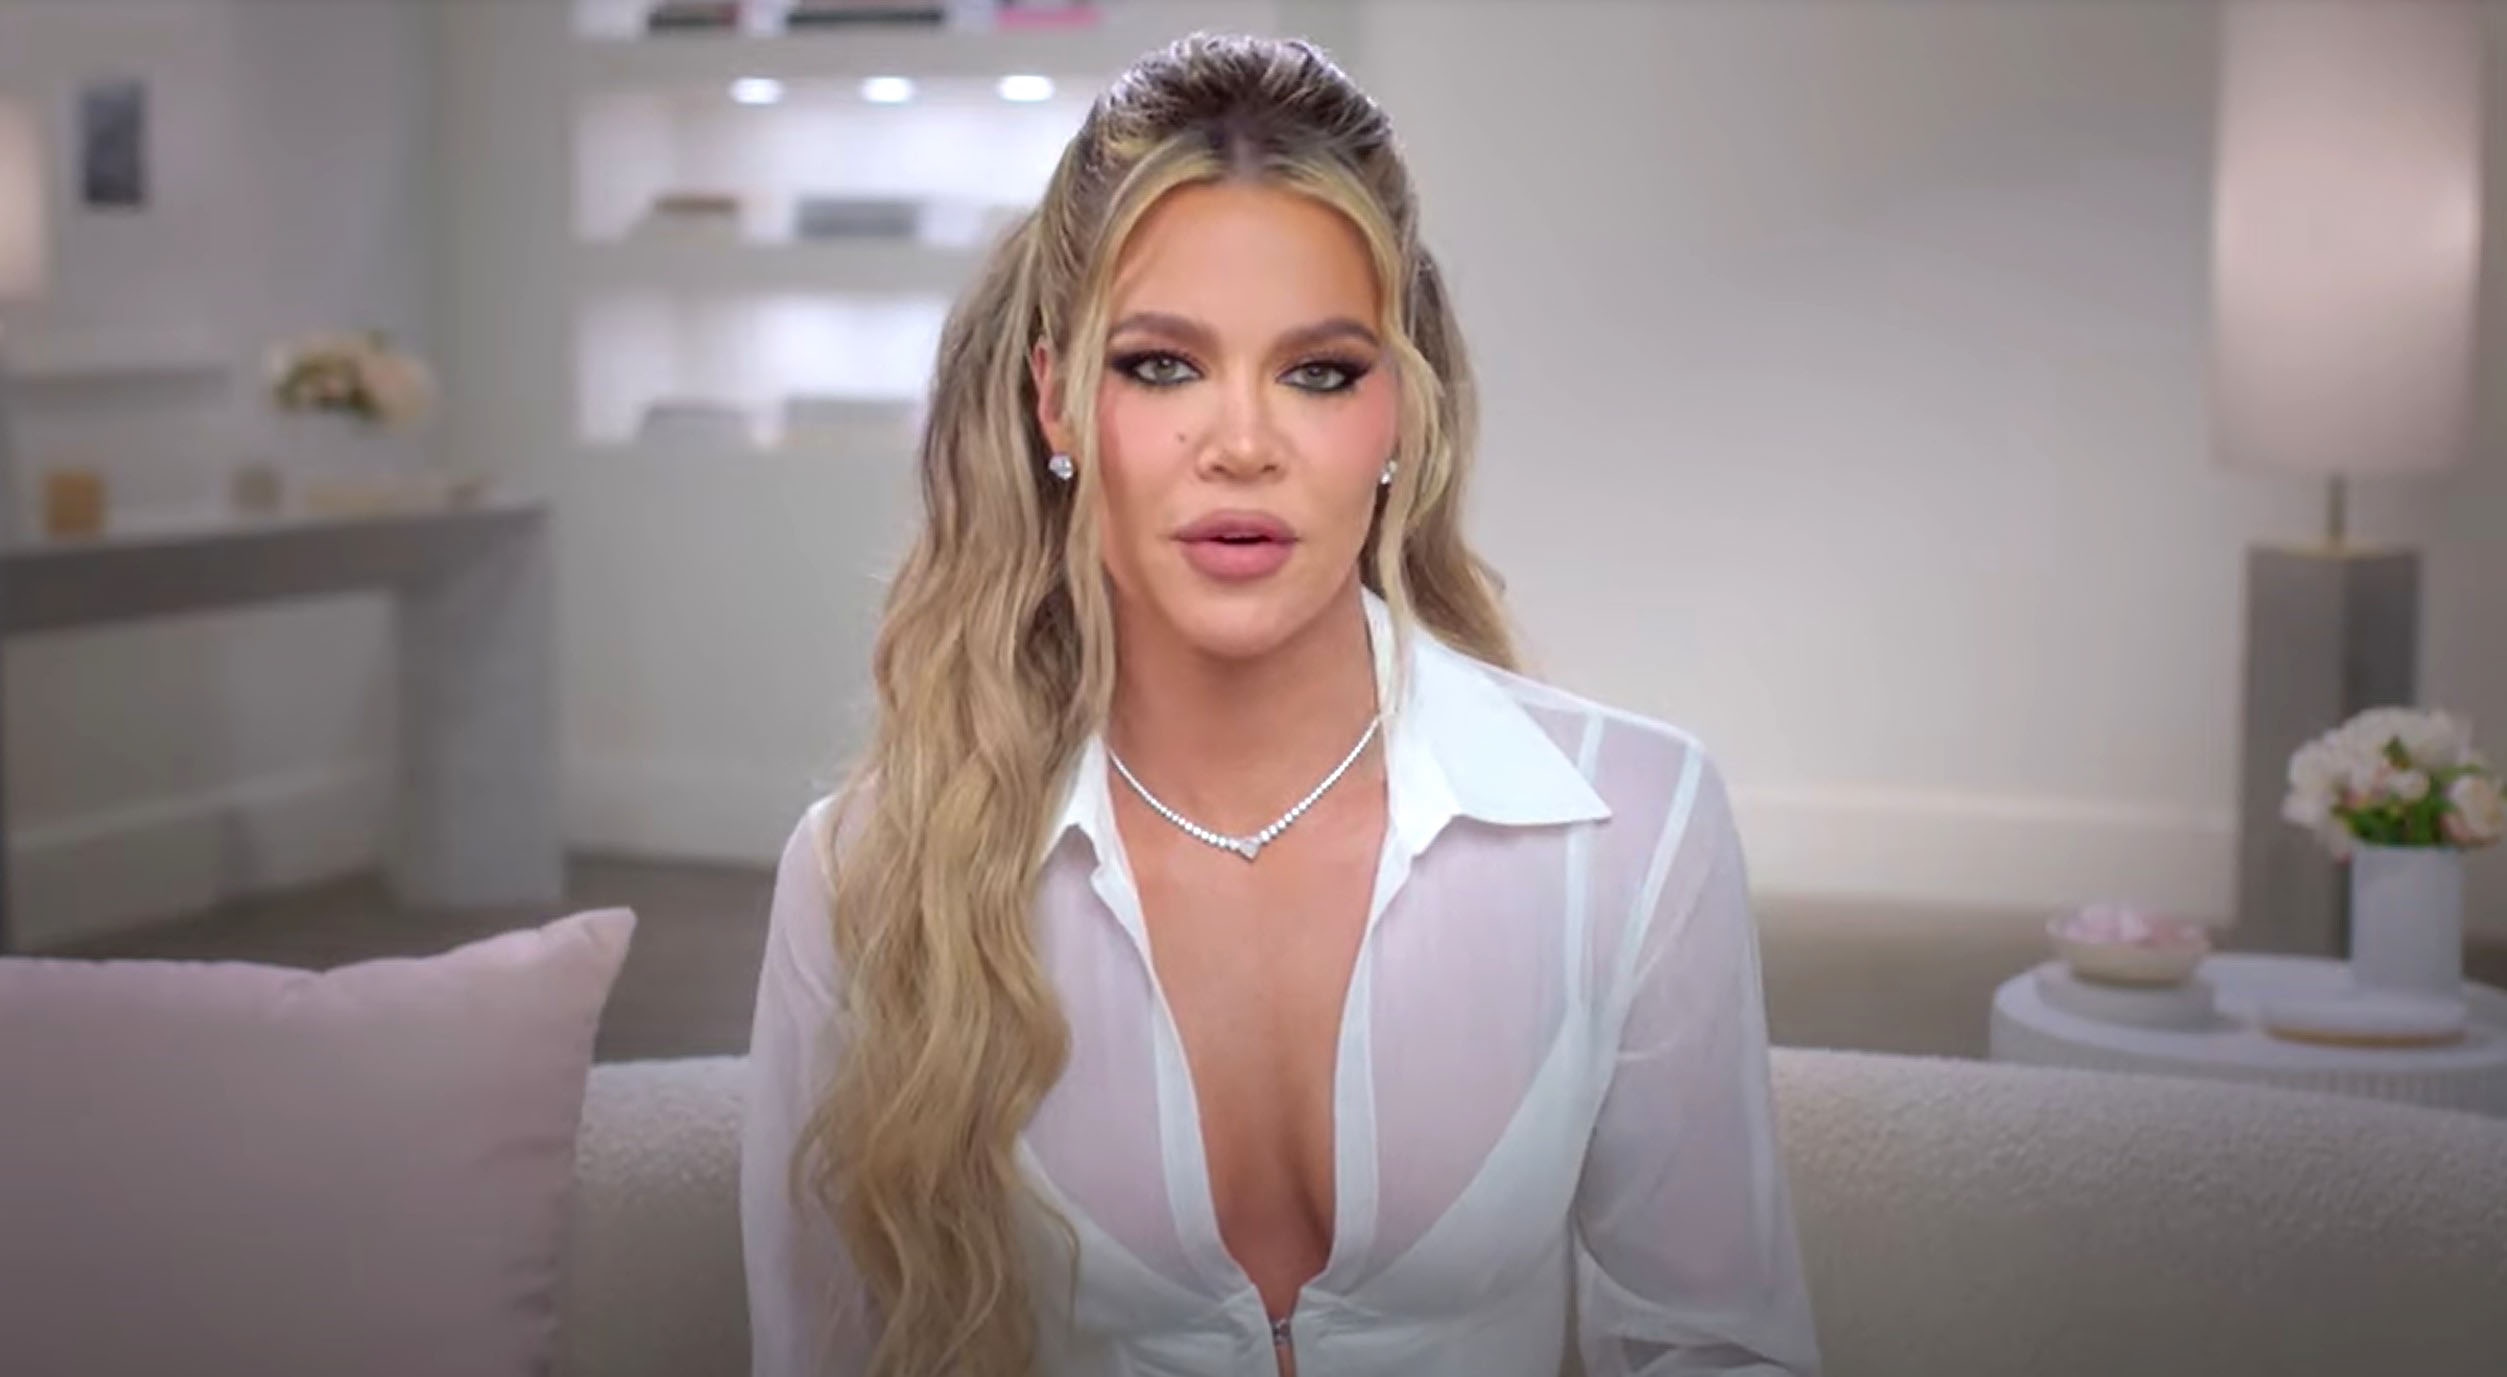 However, Khloe didn't back down and furiously clapped back as the siblings had a war of words over social media